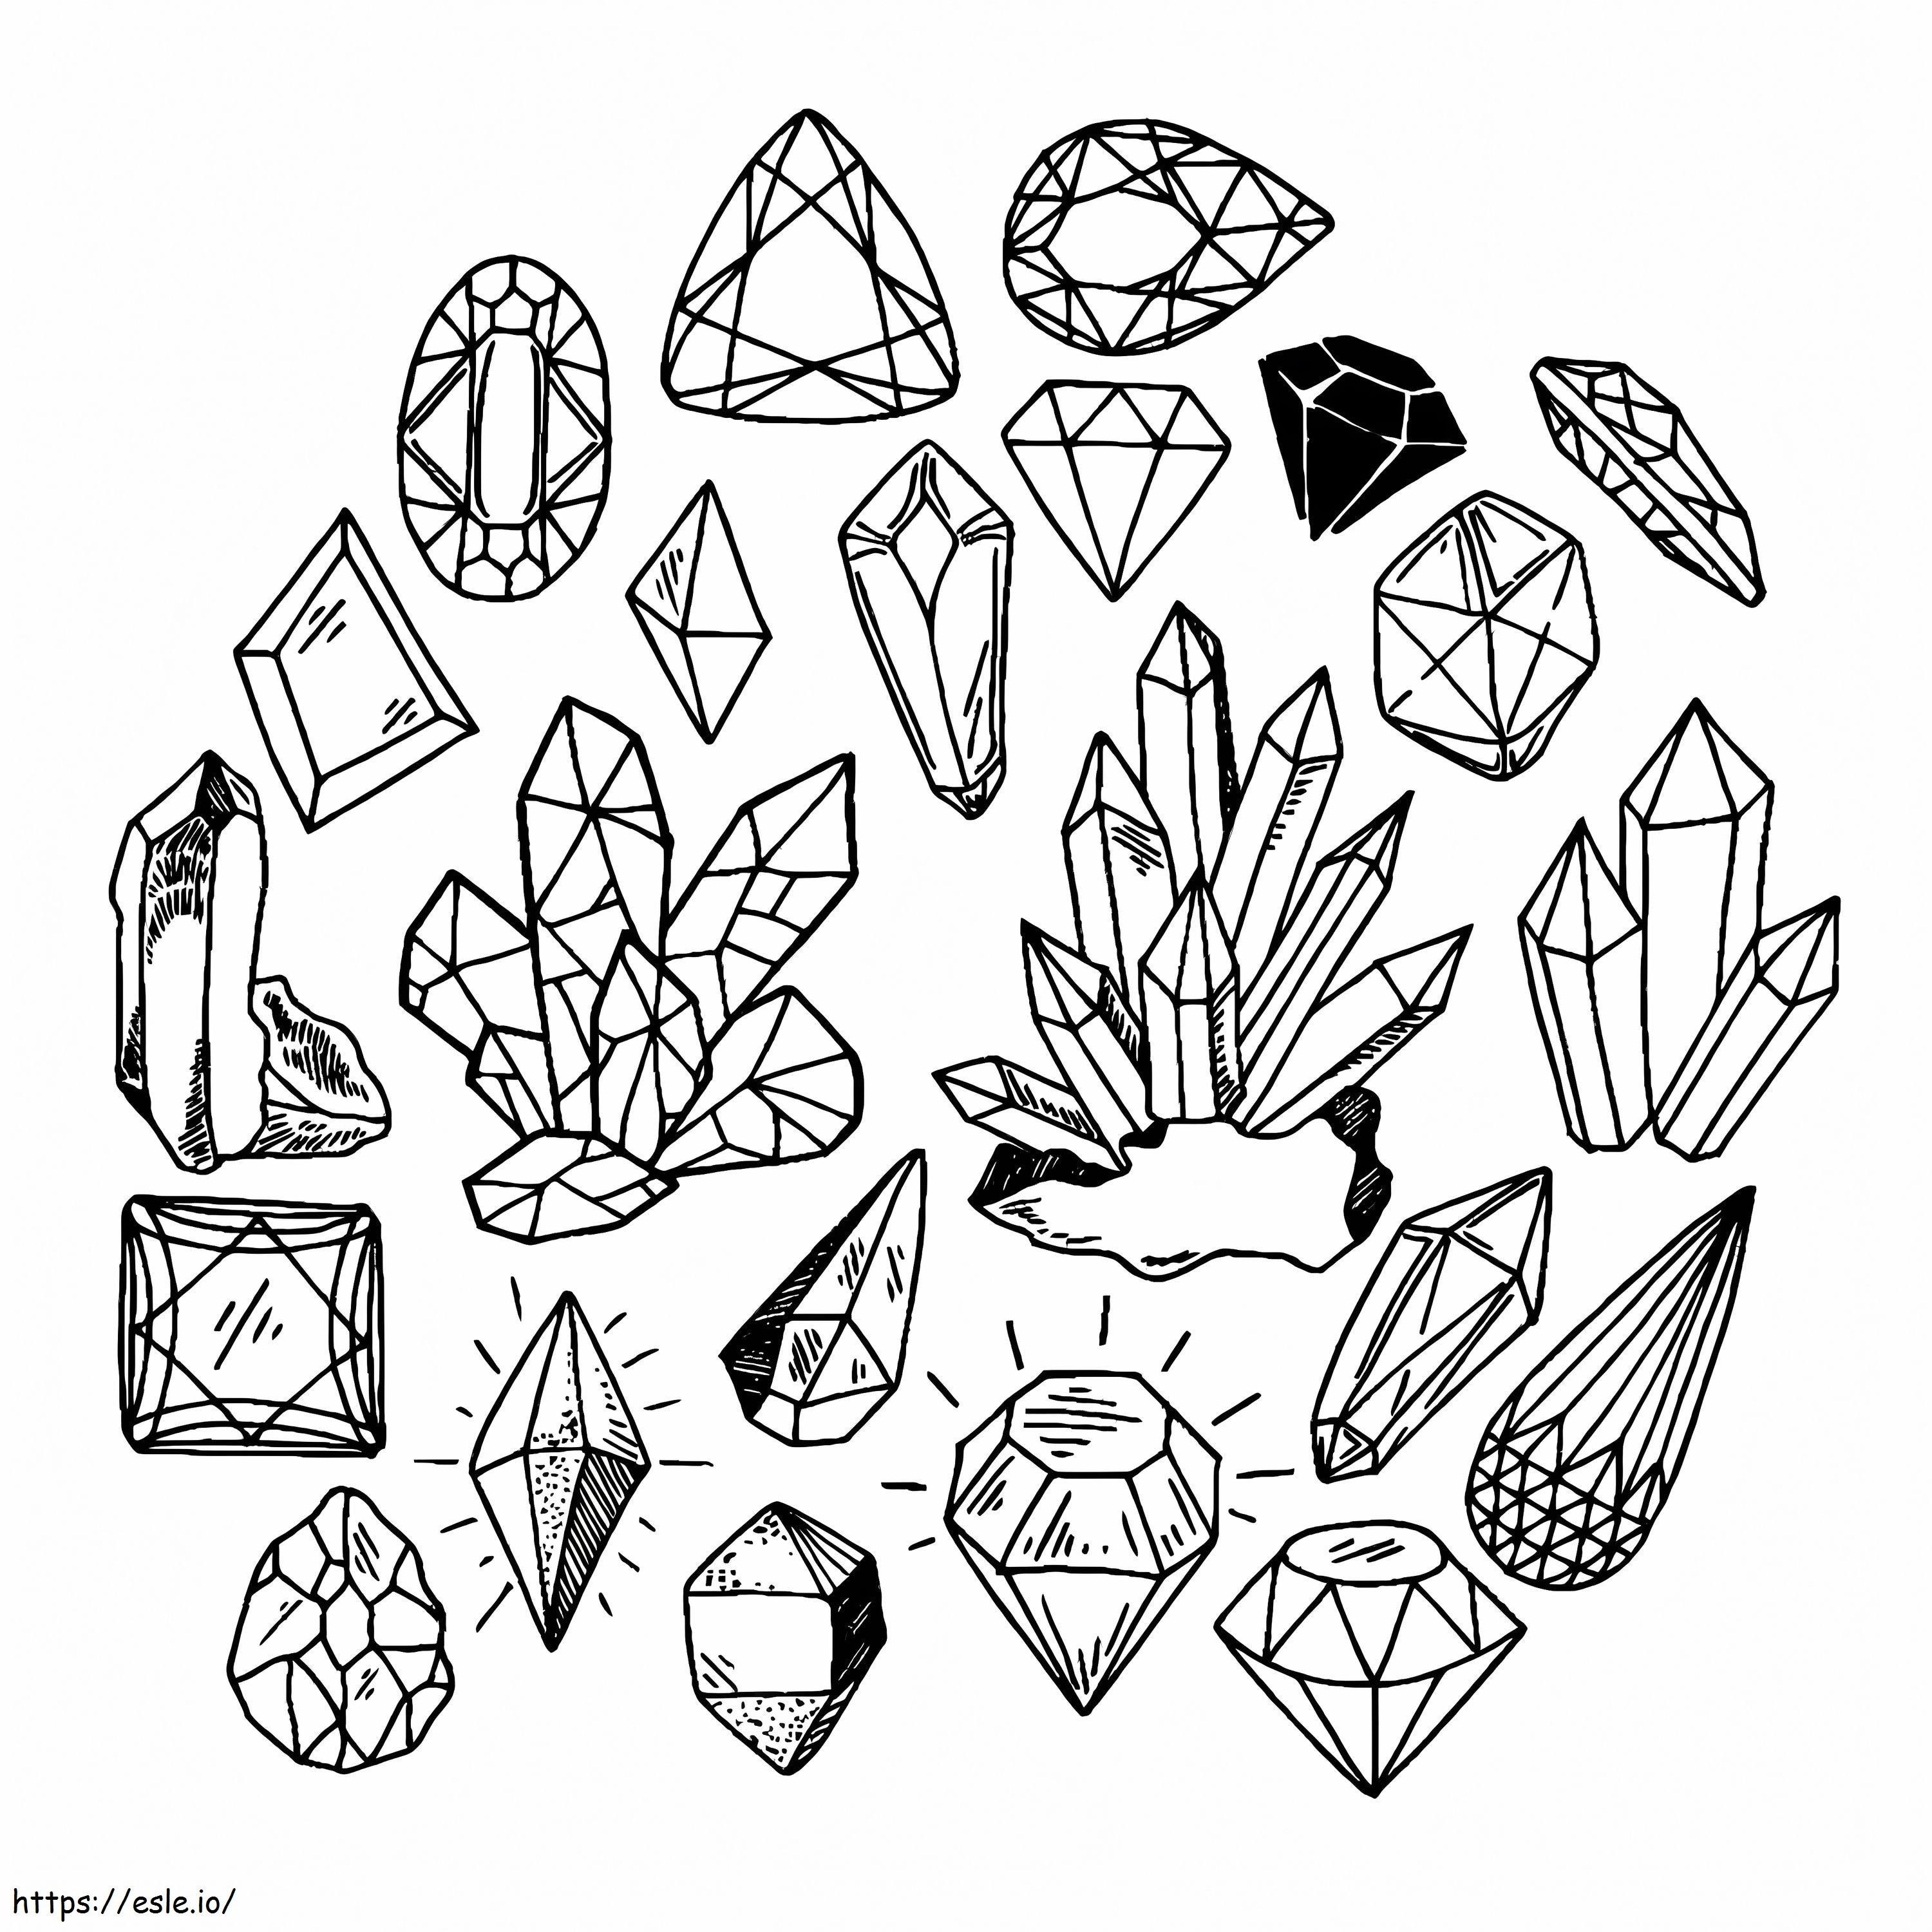 Gems Aesthetics coloring page